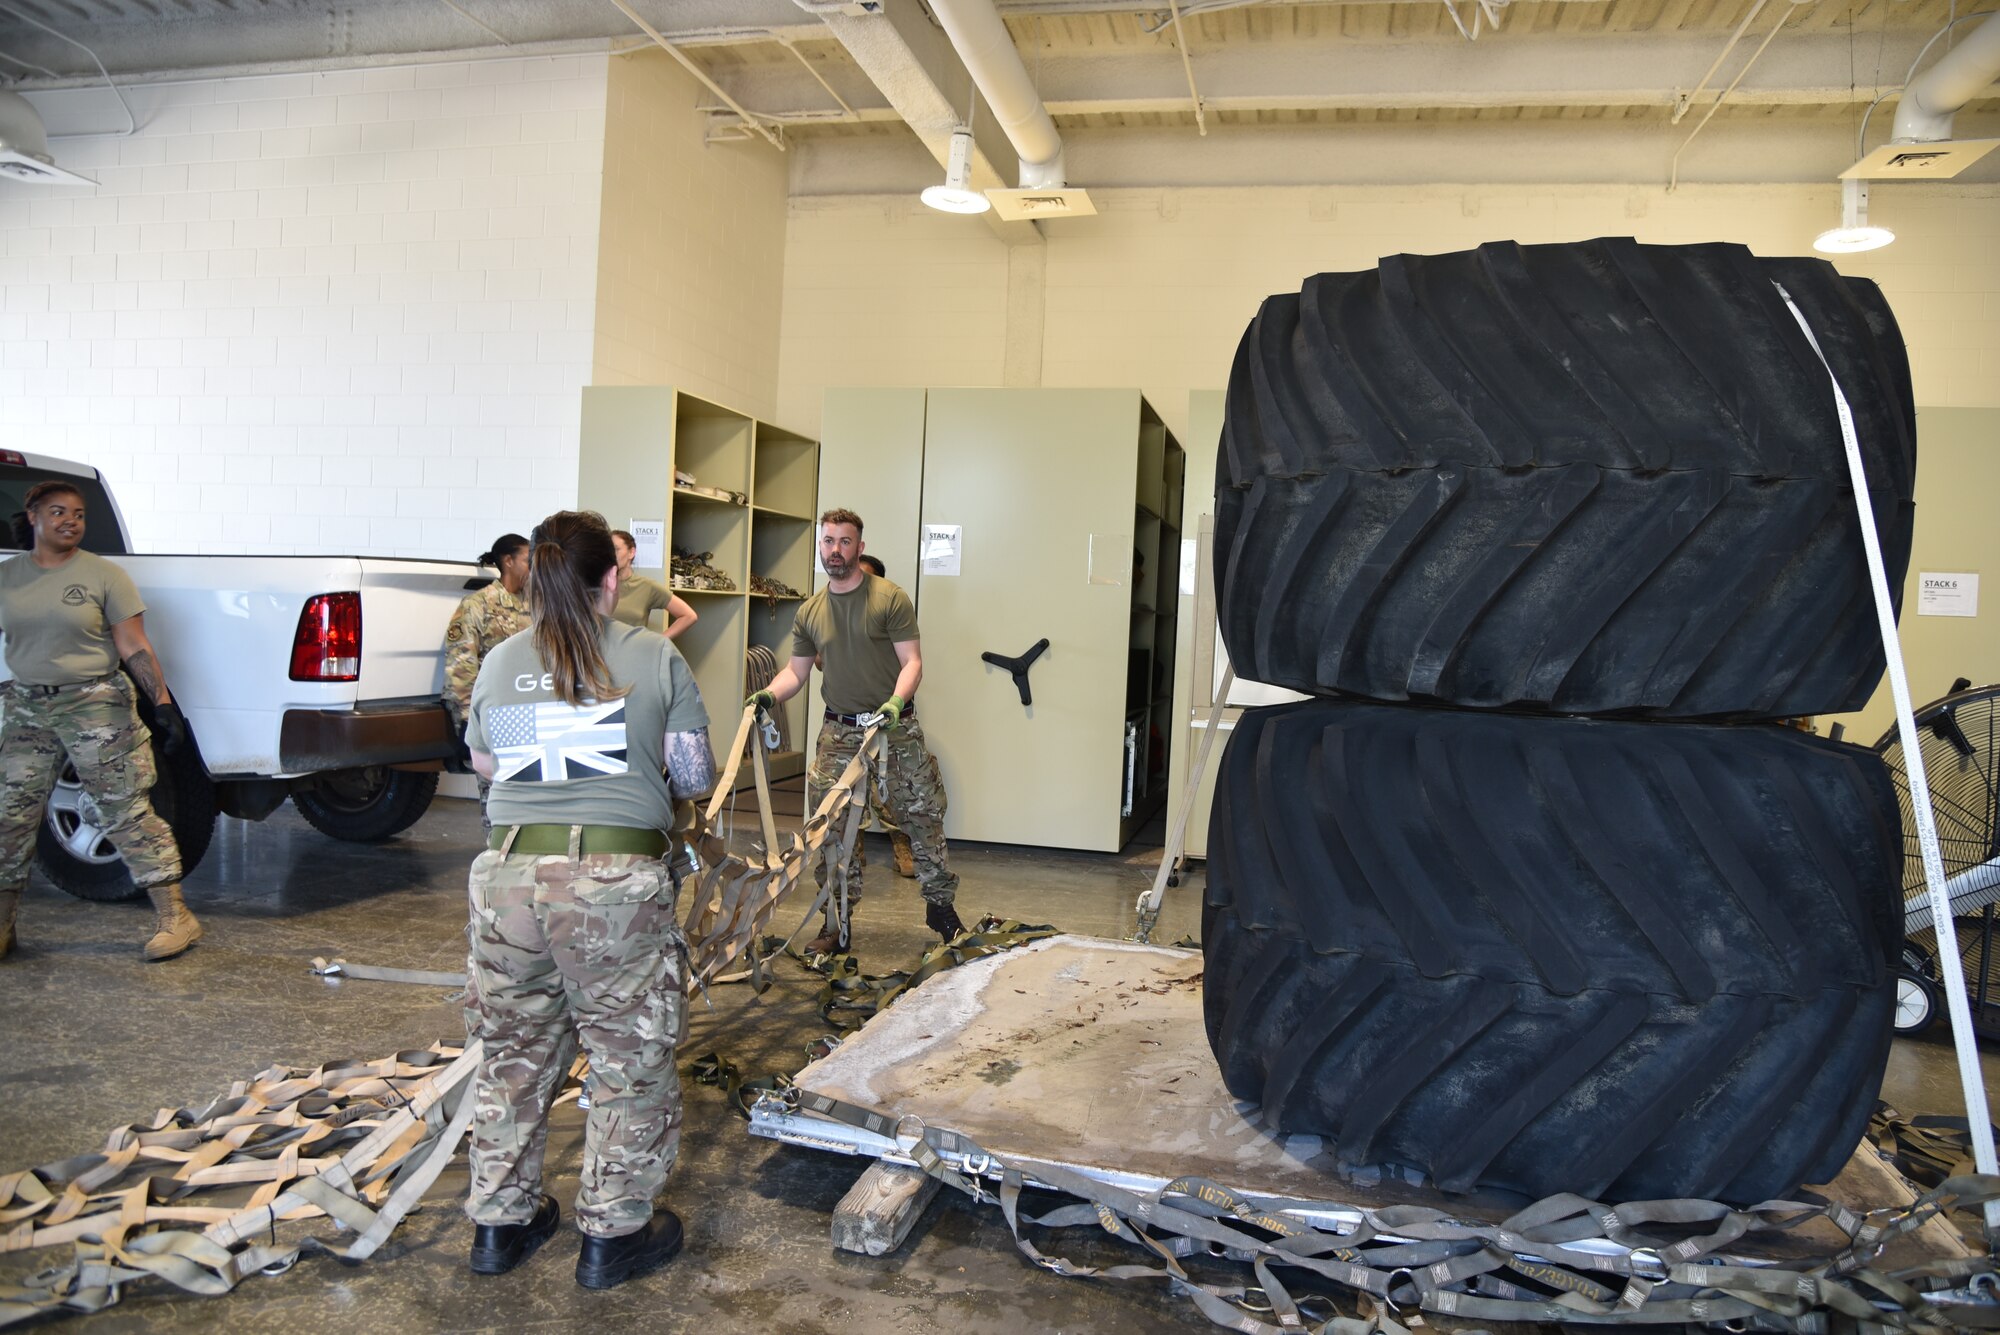 British Royal Air Forces members throw cargo net over top of tires stacked on pallet for training.